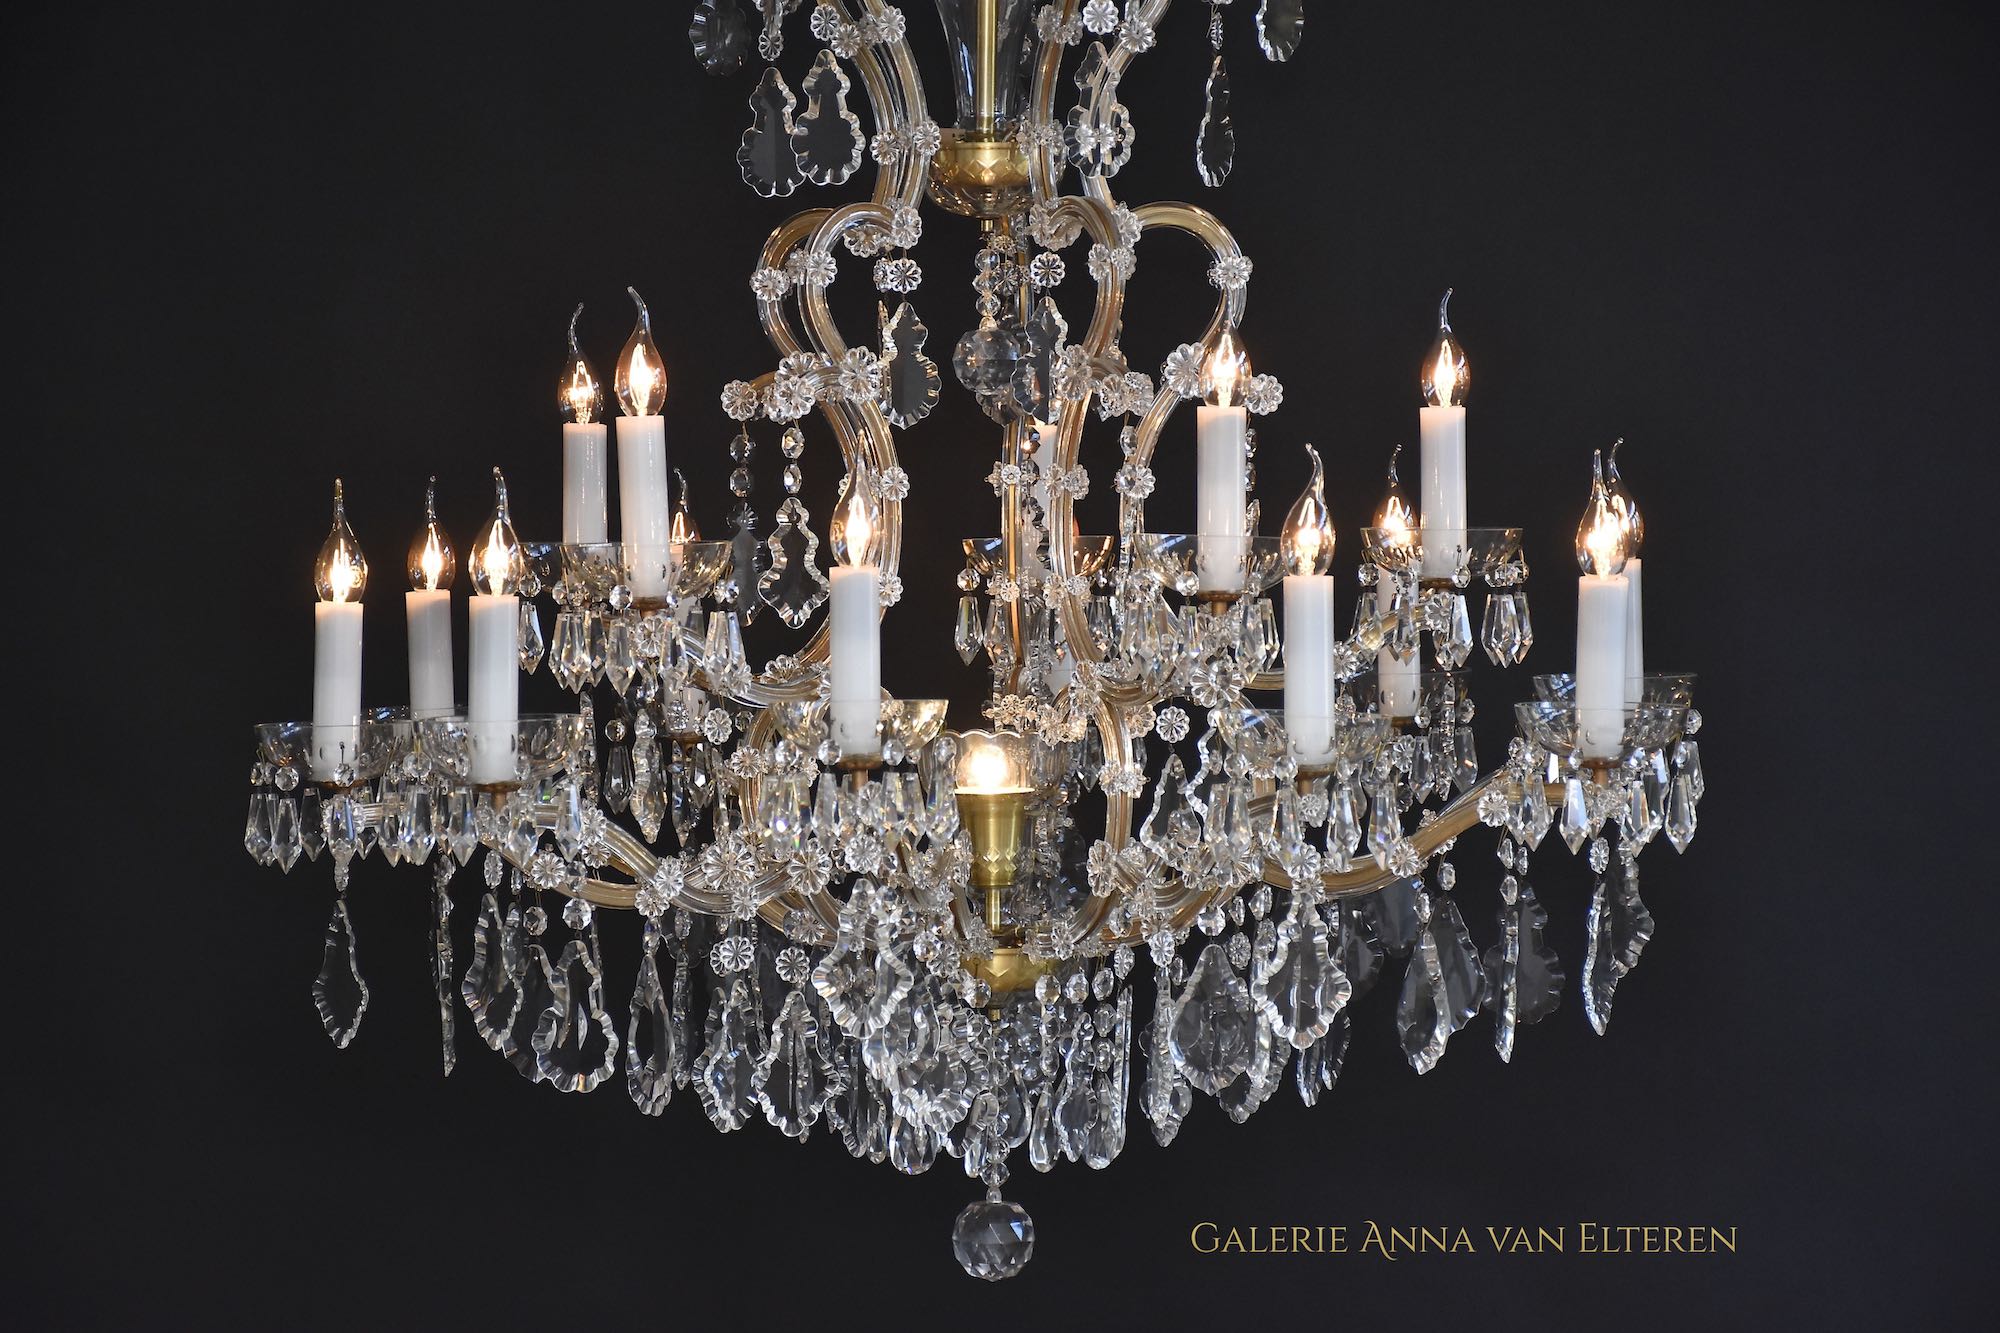 Large Bohemian chandelier 'Maria Theresia'